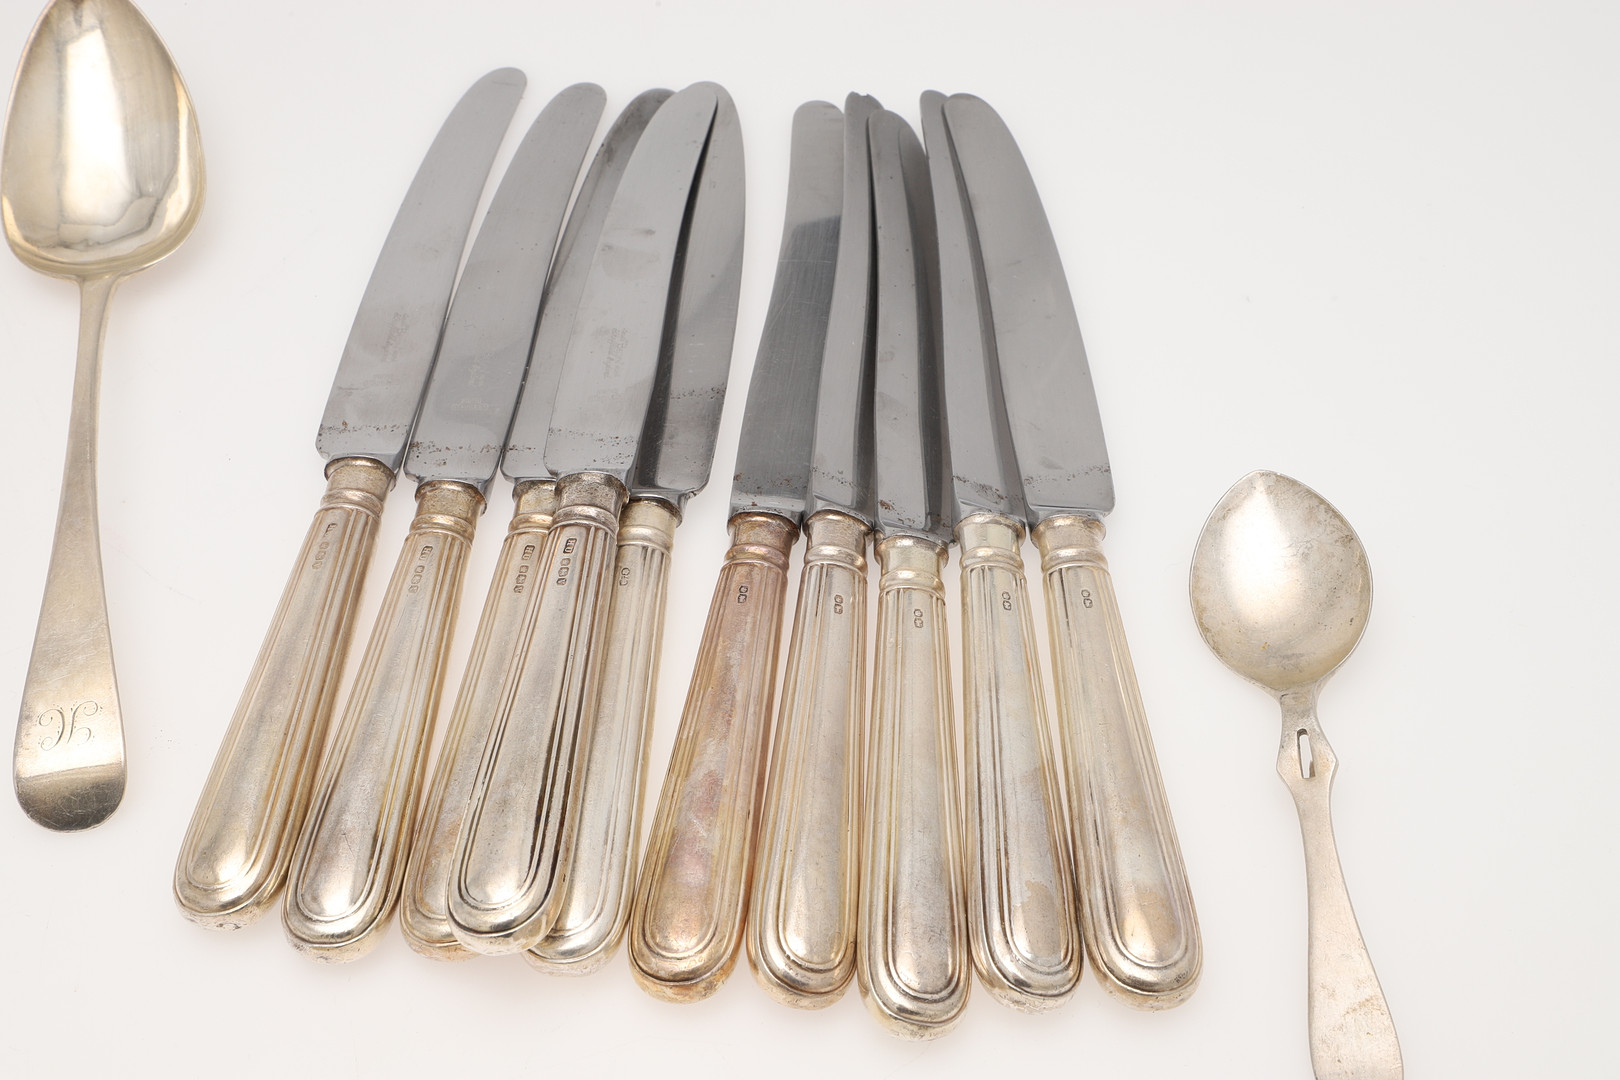 MISCELLANEOUS SILVER FLATWARE & CUTLERY. - Image 4 of 15